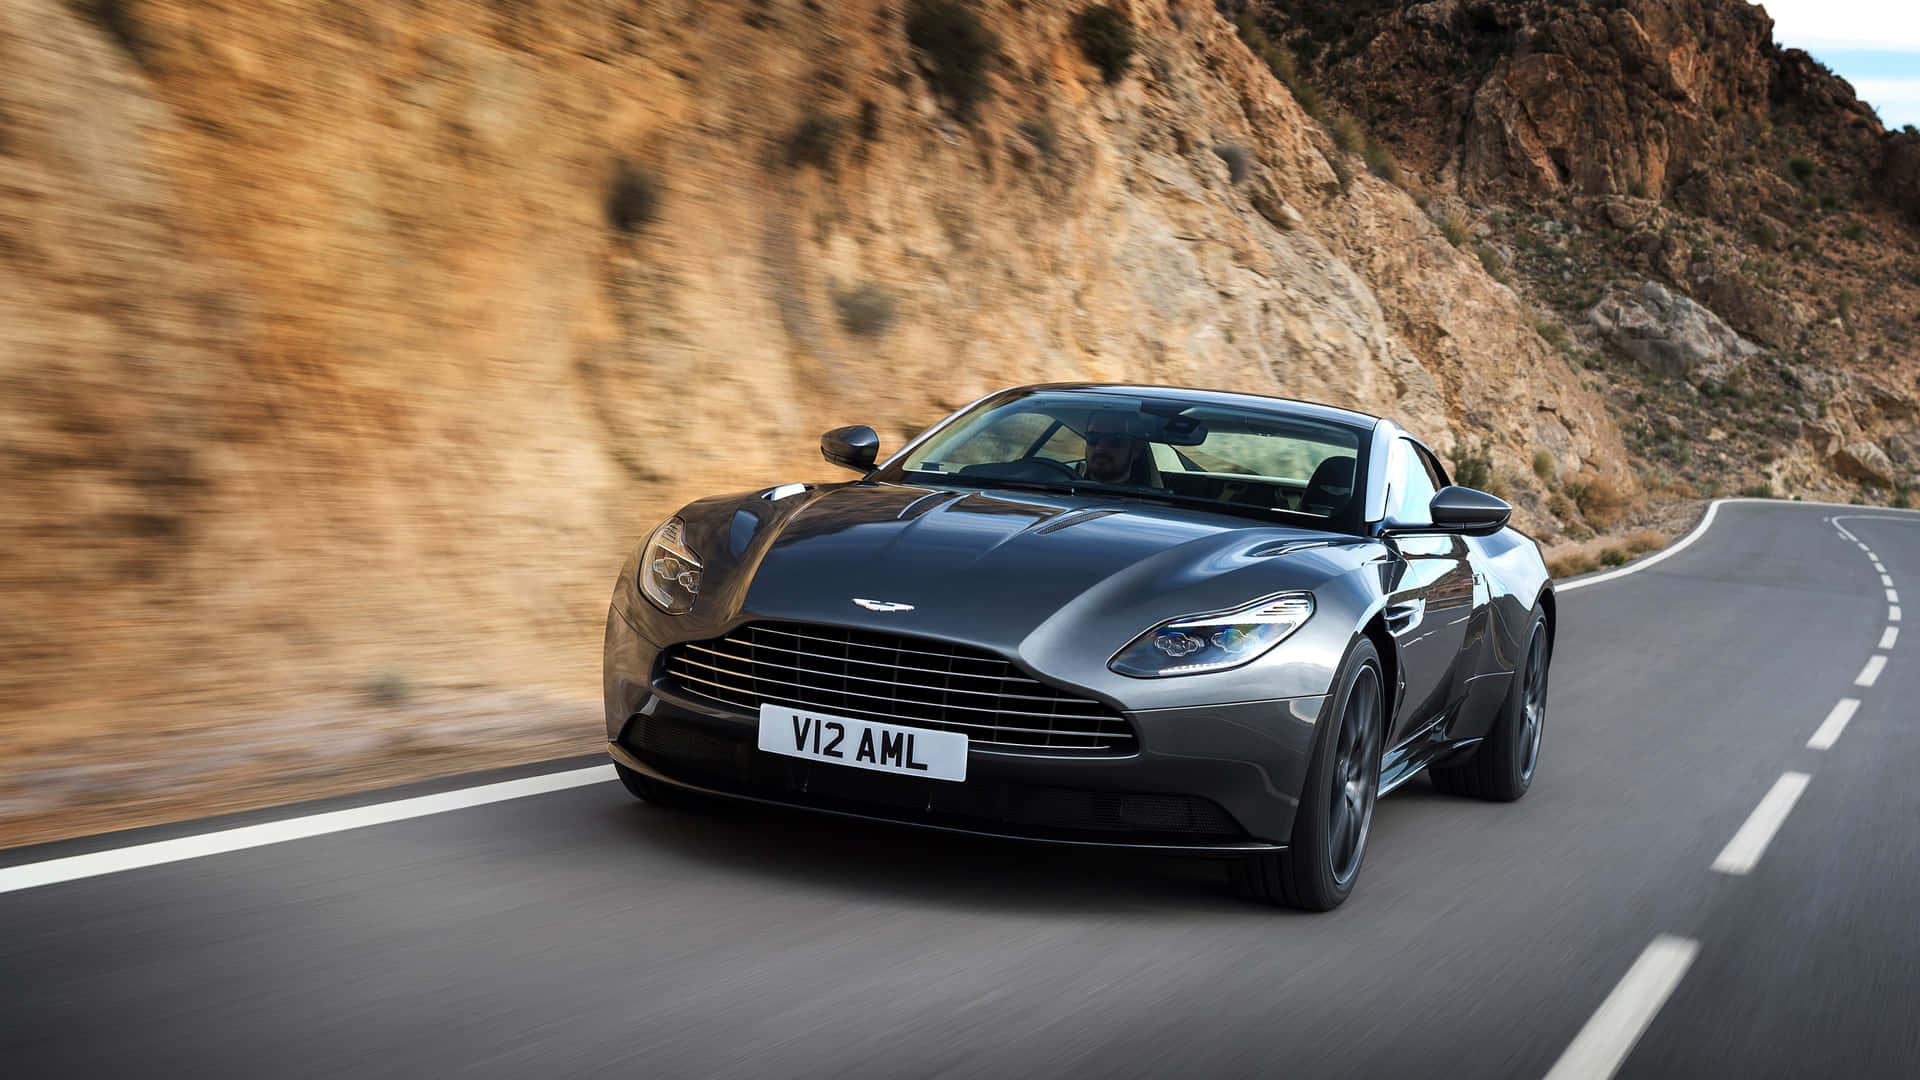 Experience the power and luxury of Aston Martin